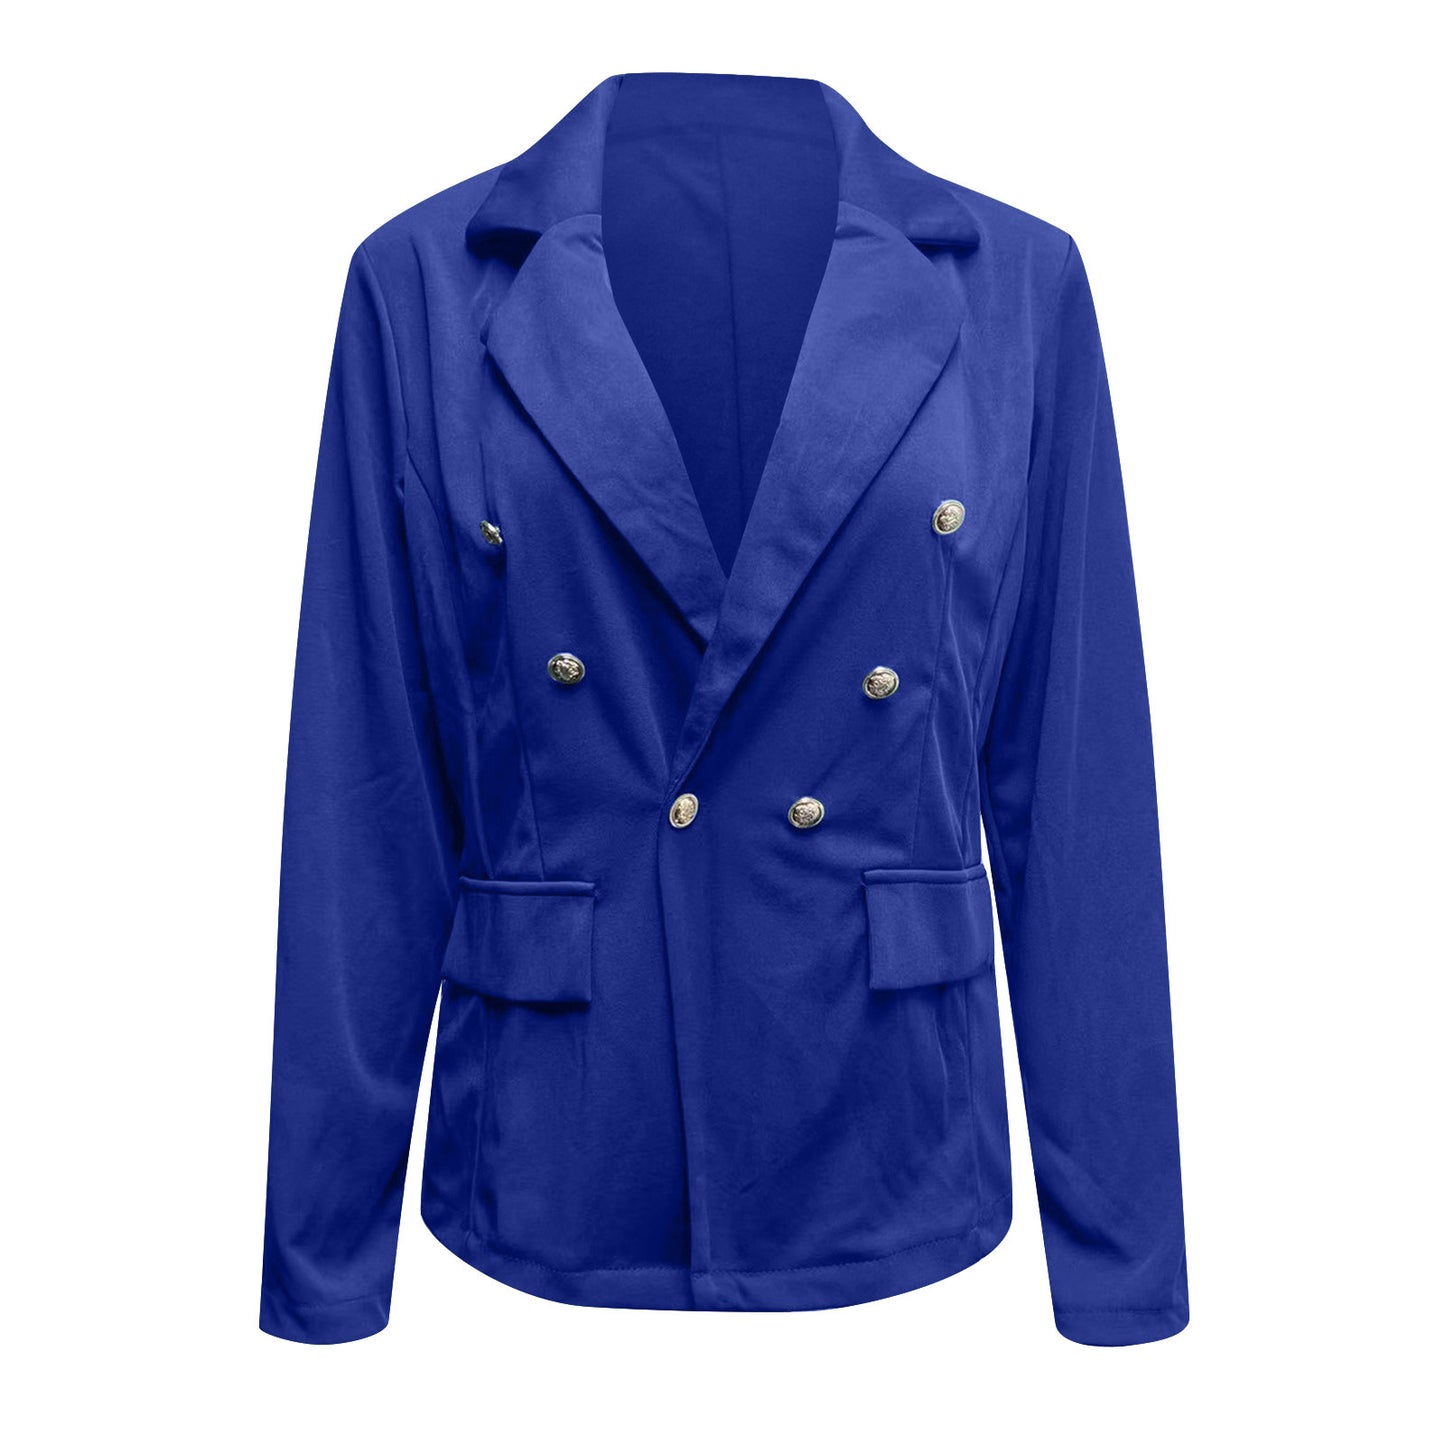 Womens Blazers for Work Casual Double Breasted Suit Jackets Long Sleeve Tops Lapel Blazer Solid Work Office Coat Tops